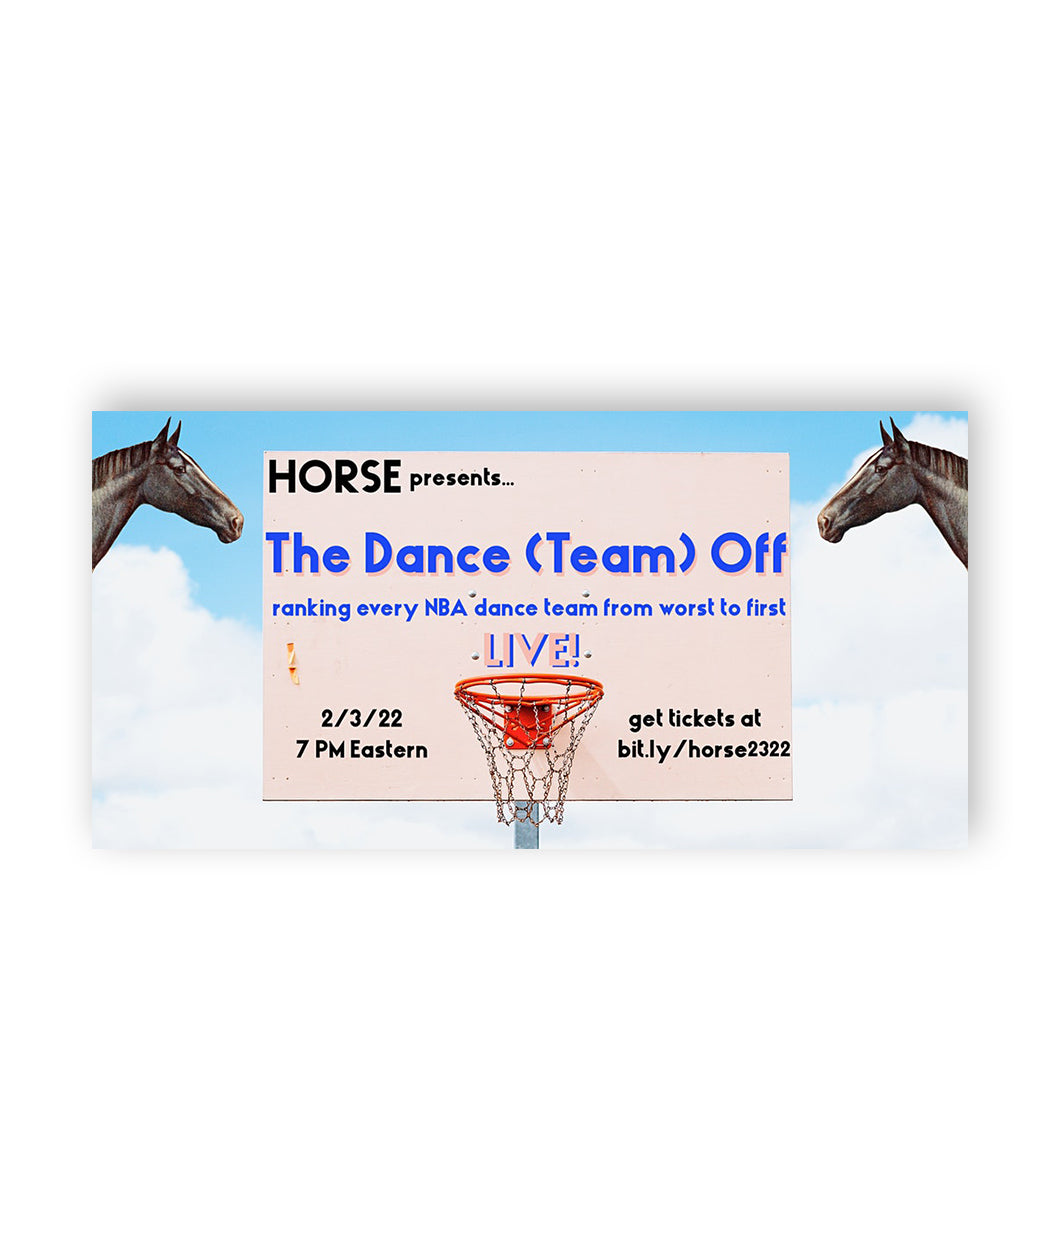 A basketball hoop with text on the backboard on a background of clouds that has a horse head on each end - by HORSE